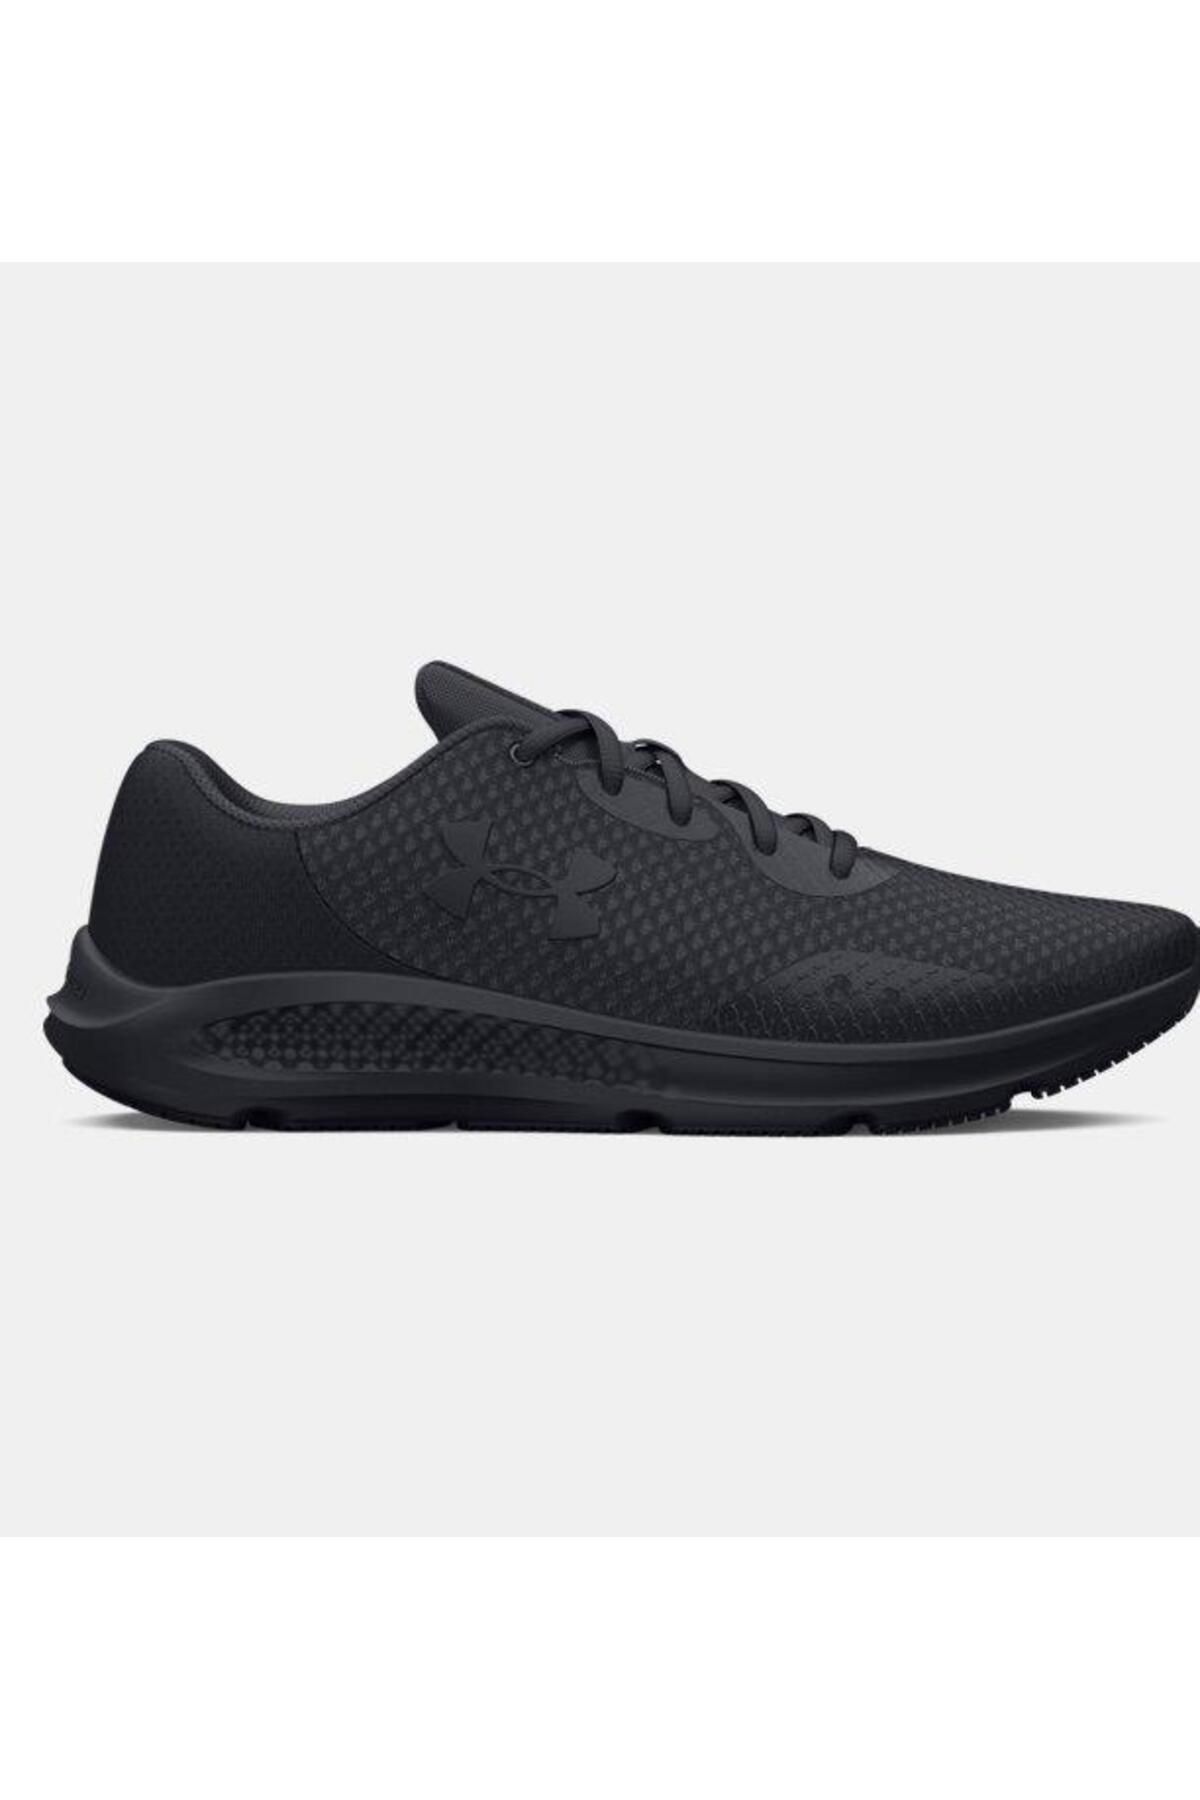 Under Armour Ua Charged Pursuit 3siyah